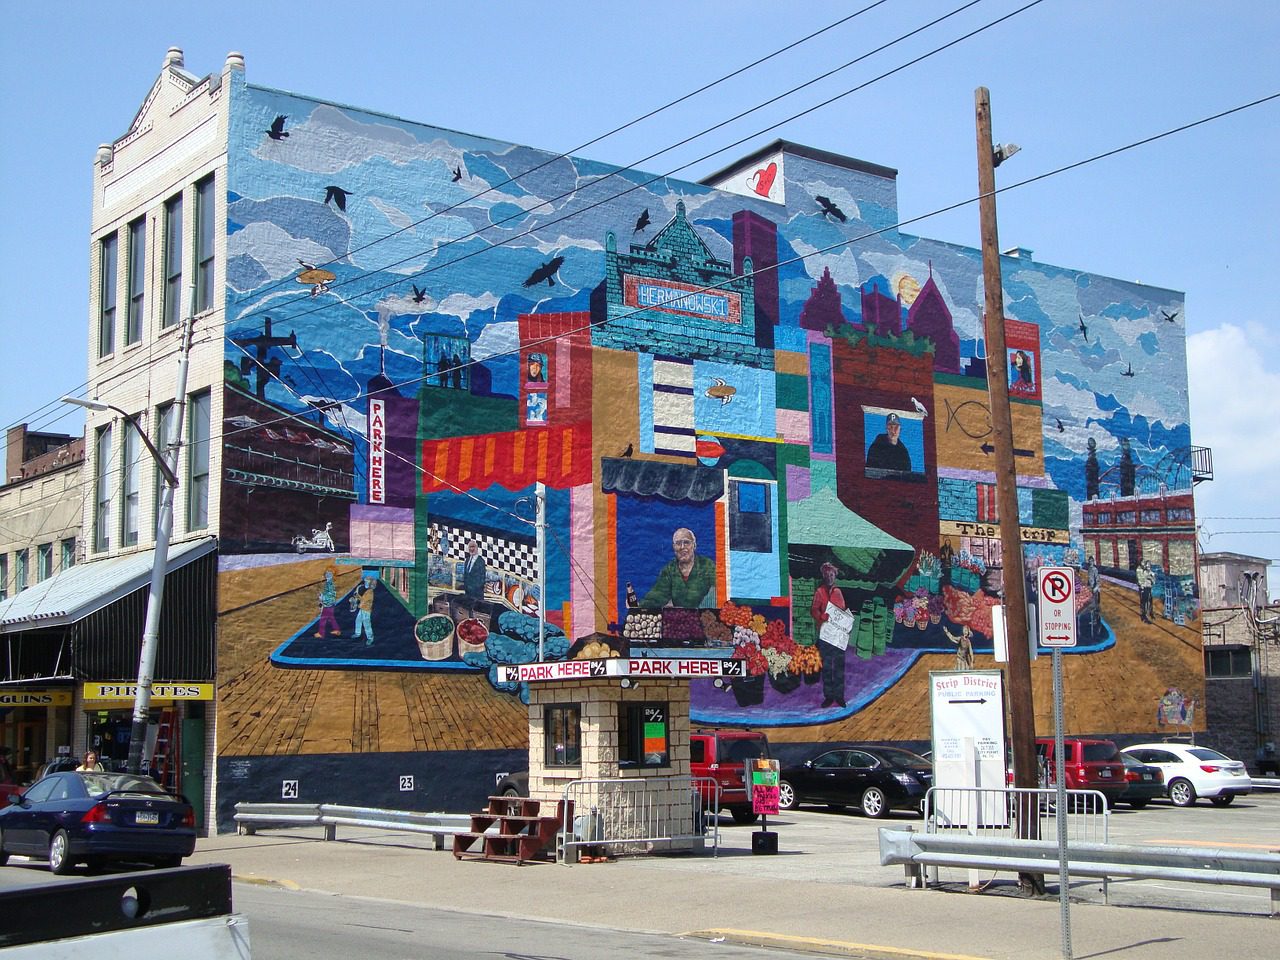 Visiting Pittsburgh's Strip District is an absolute must on our 50 Things to Do in Pittsburgh This Summer.